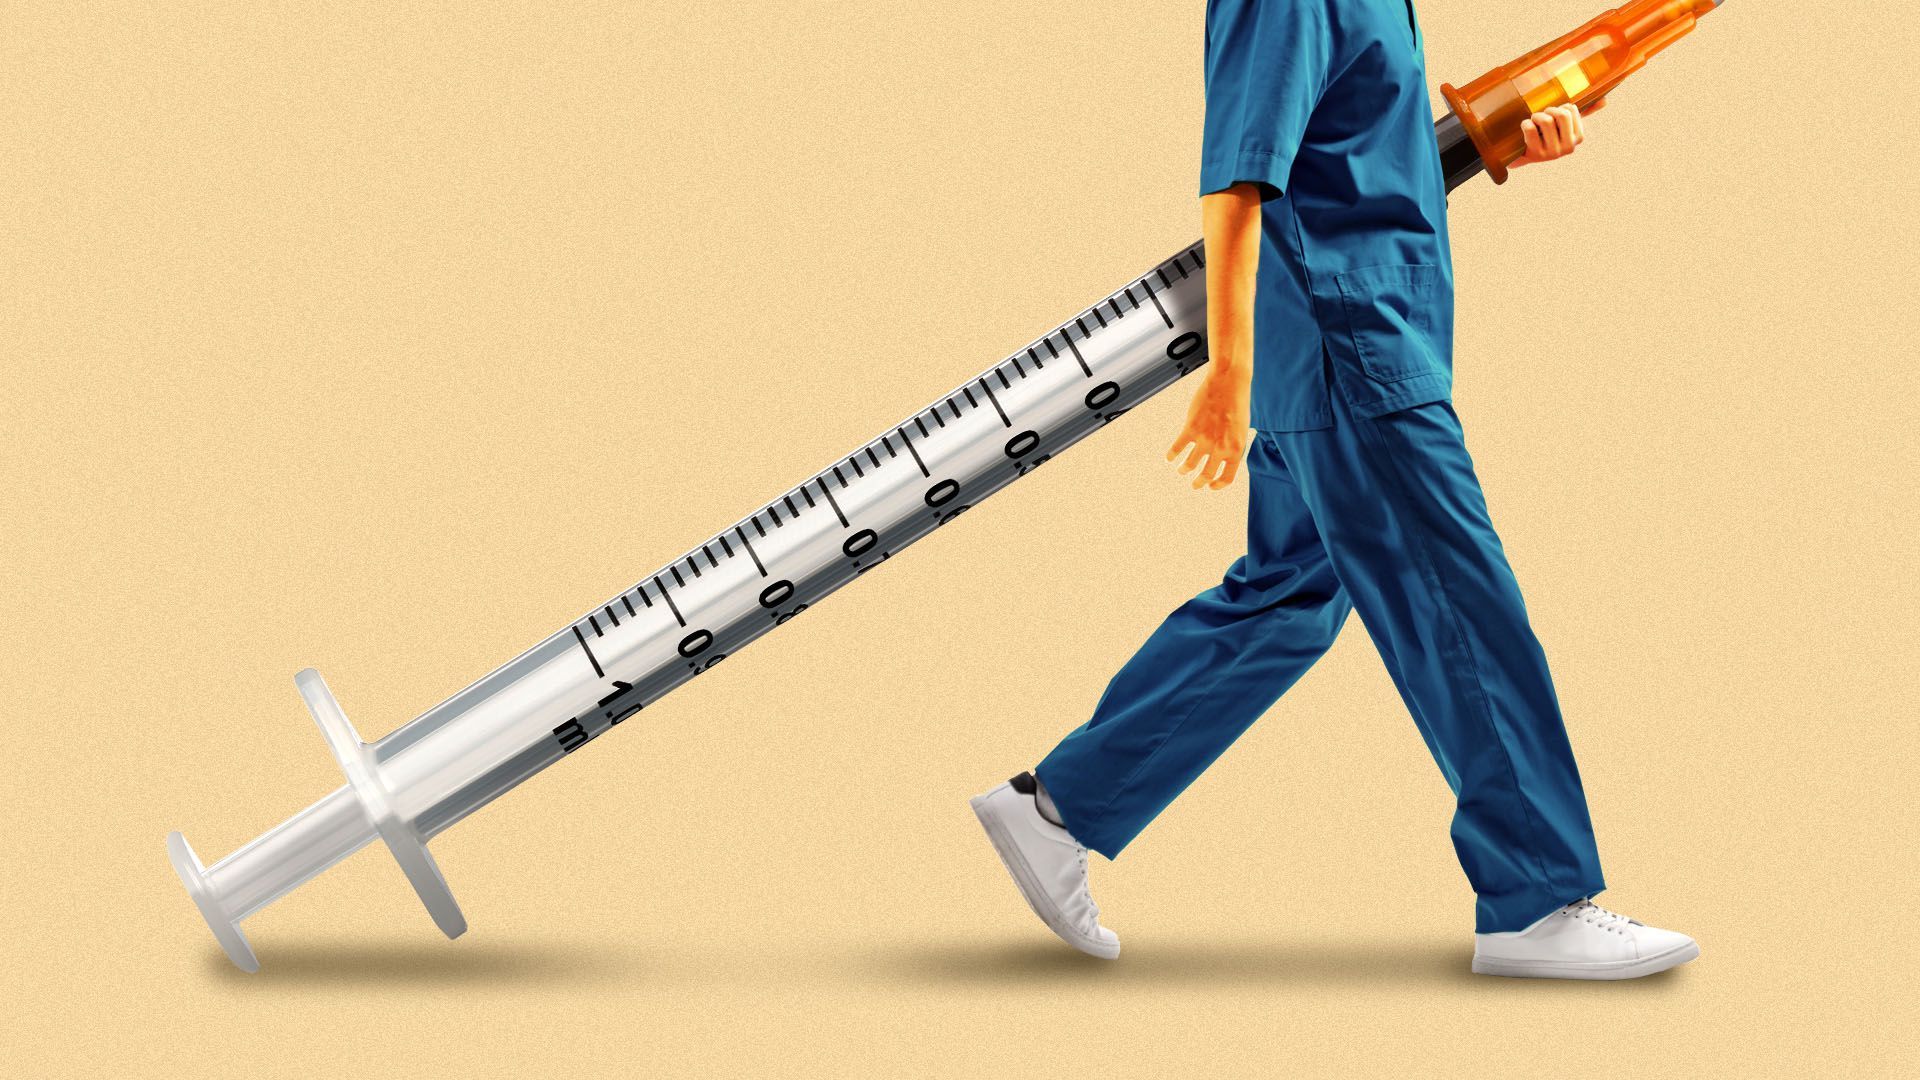 Illustration of a healthcare worker carrying a giant syringe